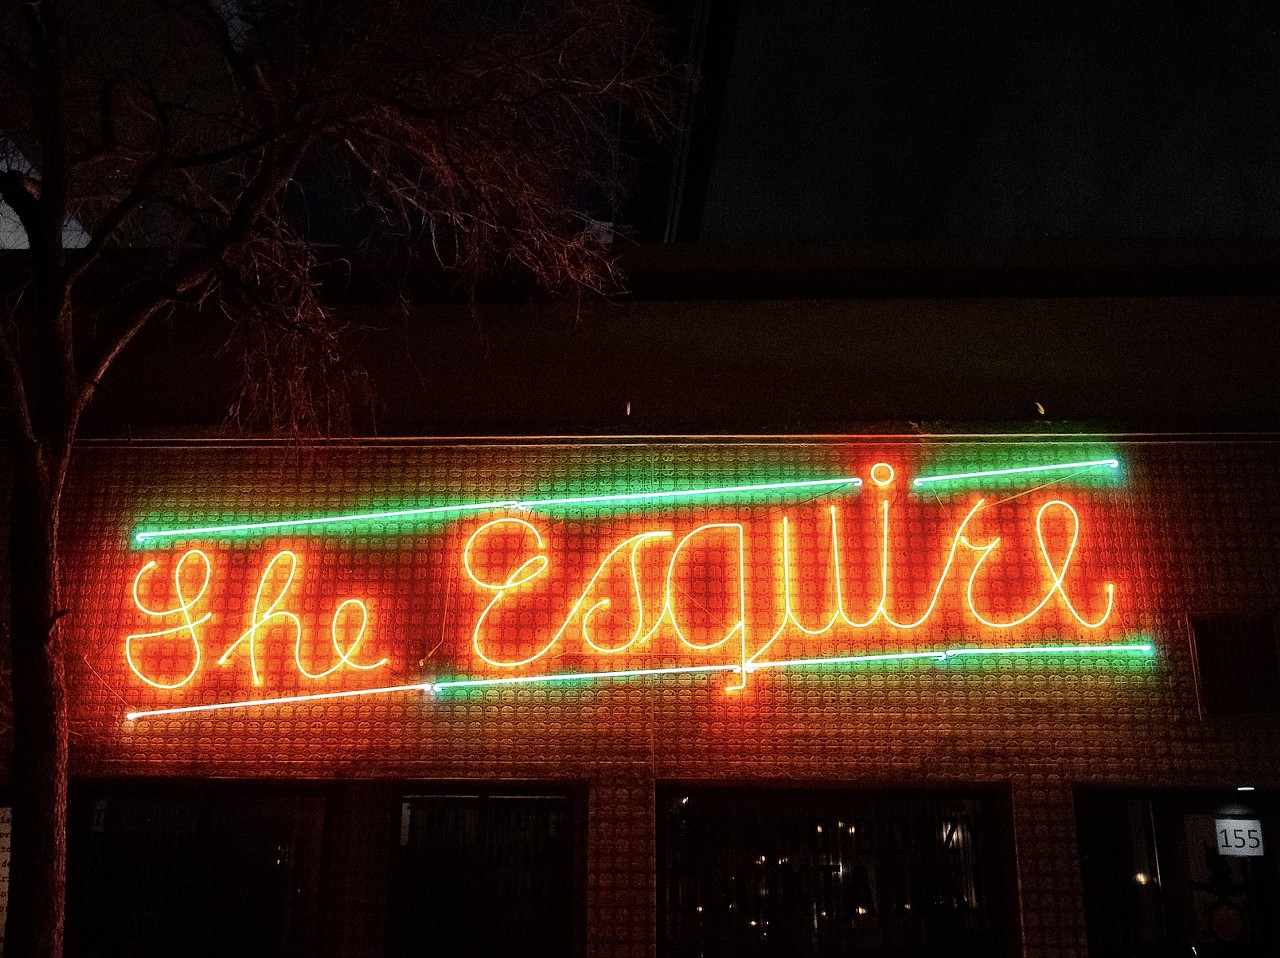 Esquire Tavern
155 E. Commerce St., (210) 222-2521, esquiretavern-sa.com
Located on the River Walk with the longest wooden-top bar in Texas, this spot gives you a great chance to check out a whole host of singles. You can cozy up in one of the booths, or head out to the tiny terrace that overlooks the river. Romantic, isn’t it?